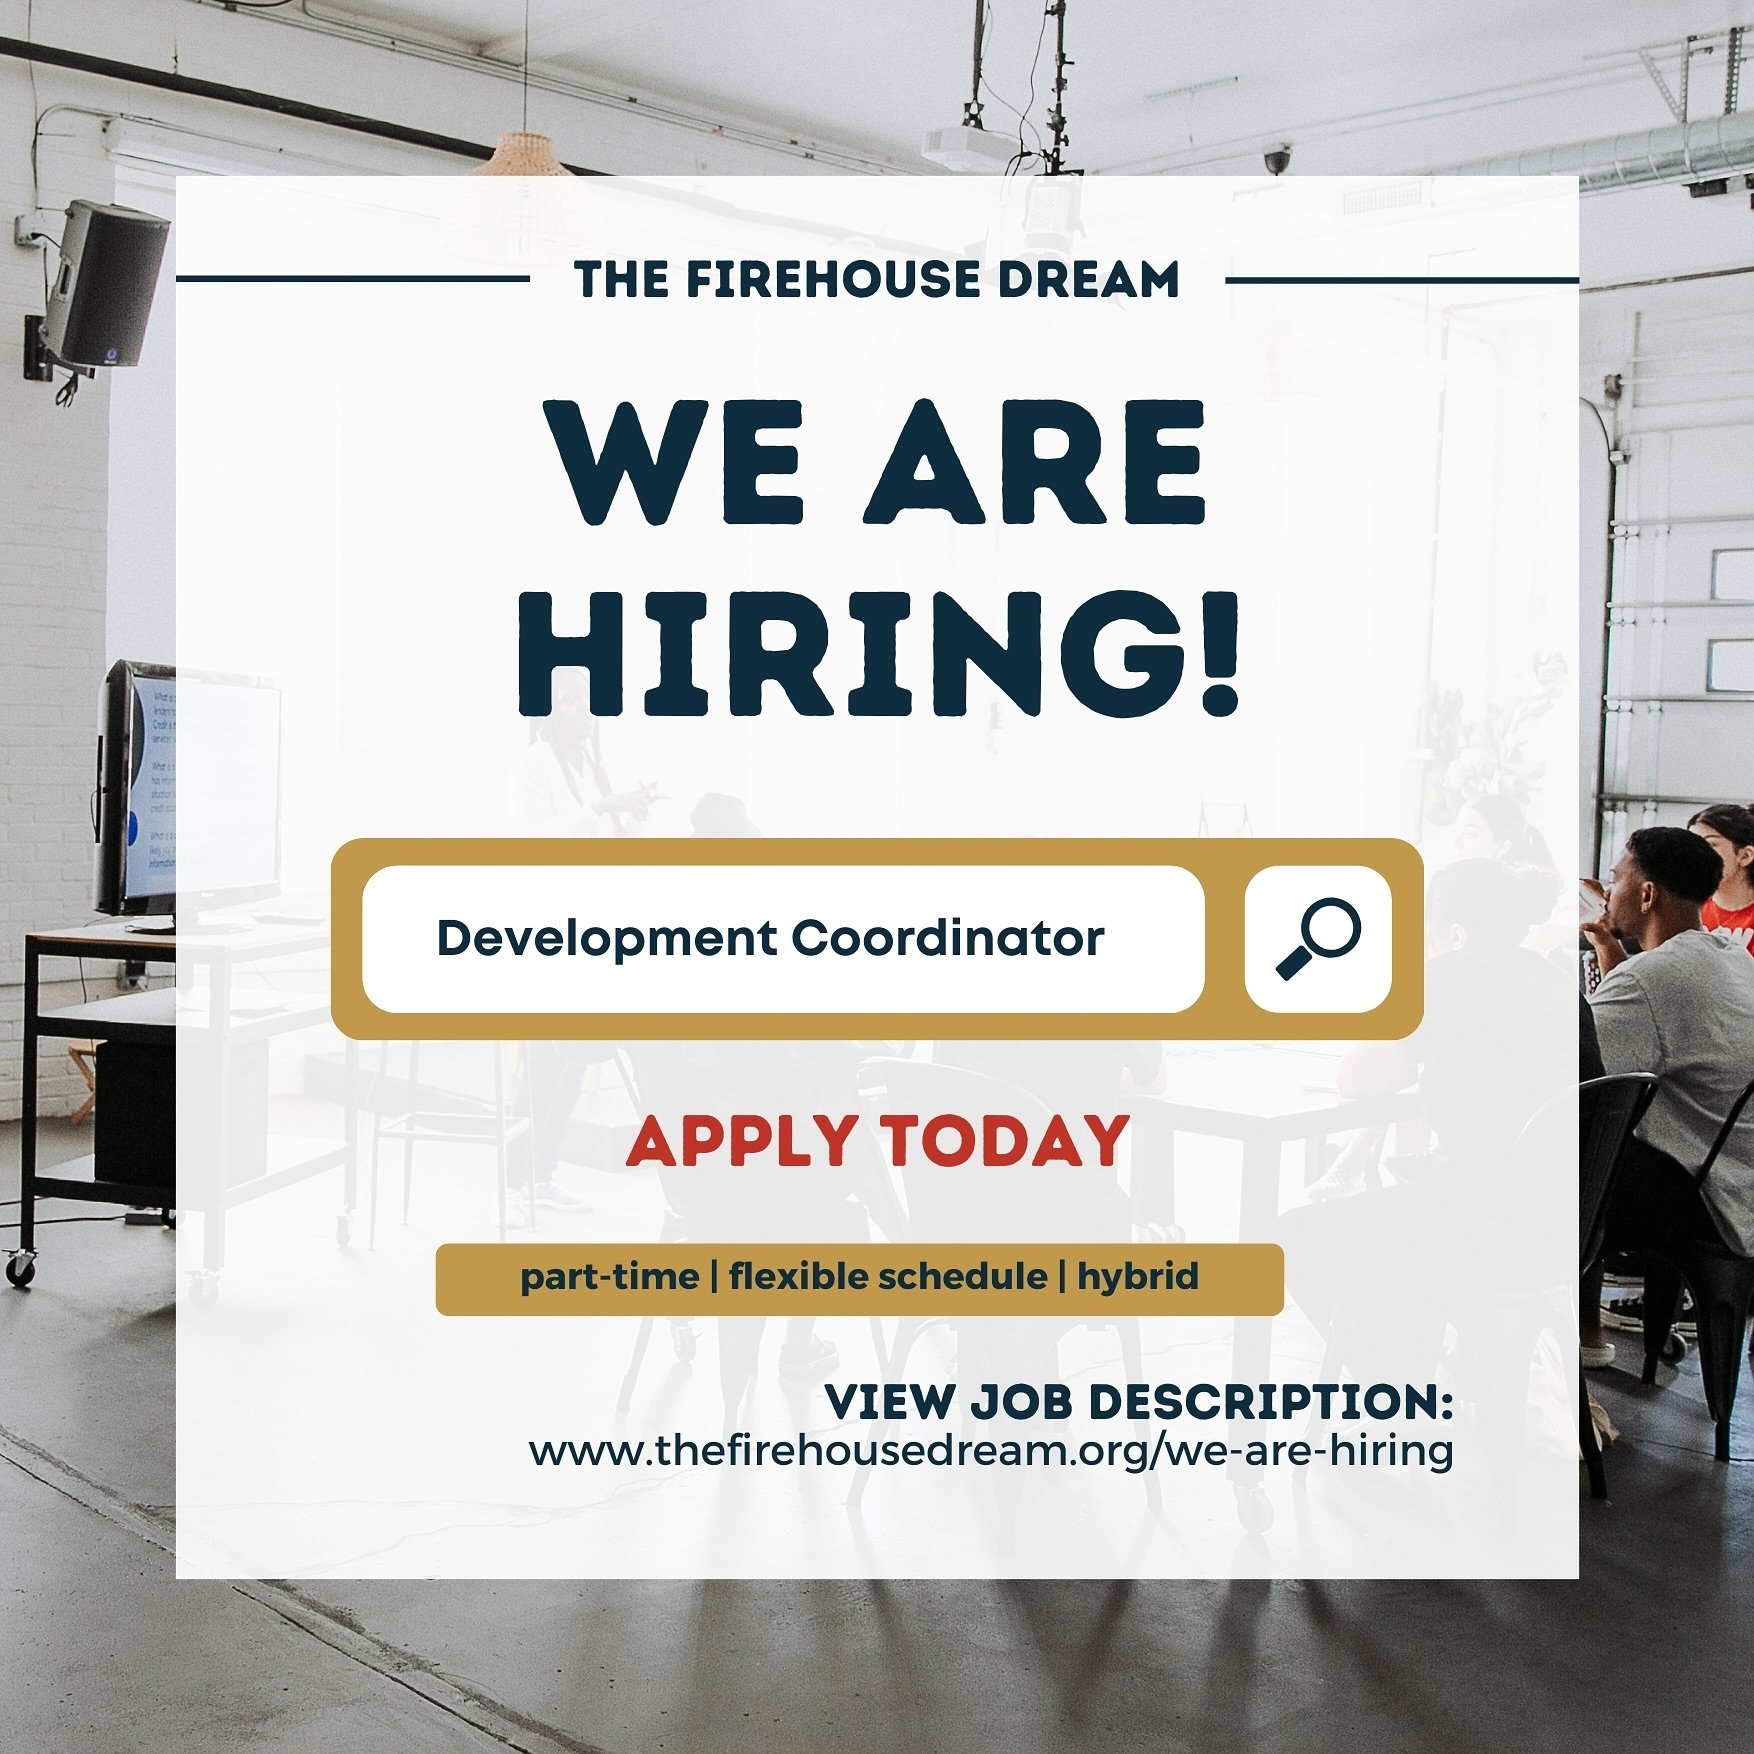 We are excited to share we are hiring a part time Development Coordinator. Our dream is to add to our team someone who values a community-centered approach with fundraising that is asset based and co-creates with our team, giving partners, and neighb